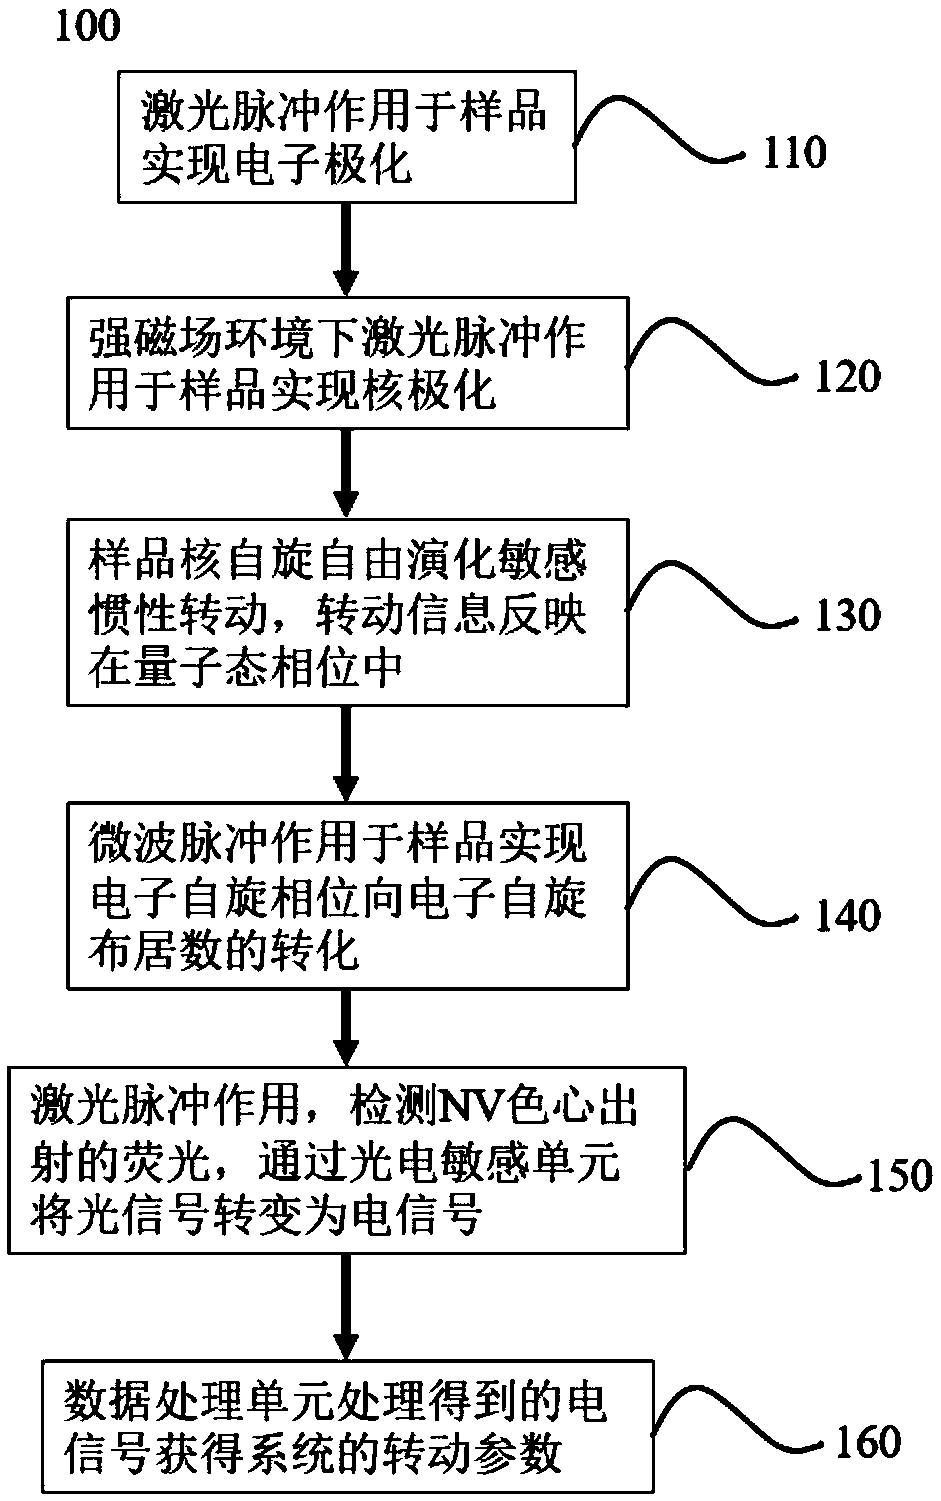 Inertia measurement device and method based on diamond NV color center under high magnetic field